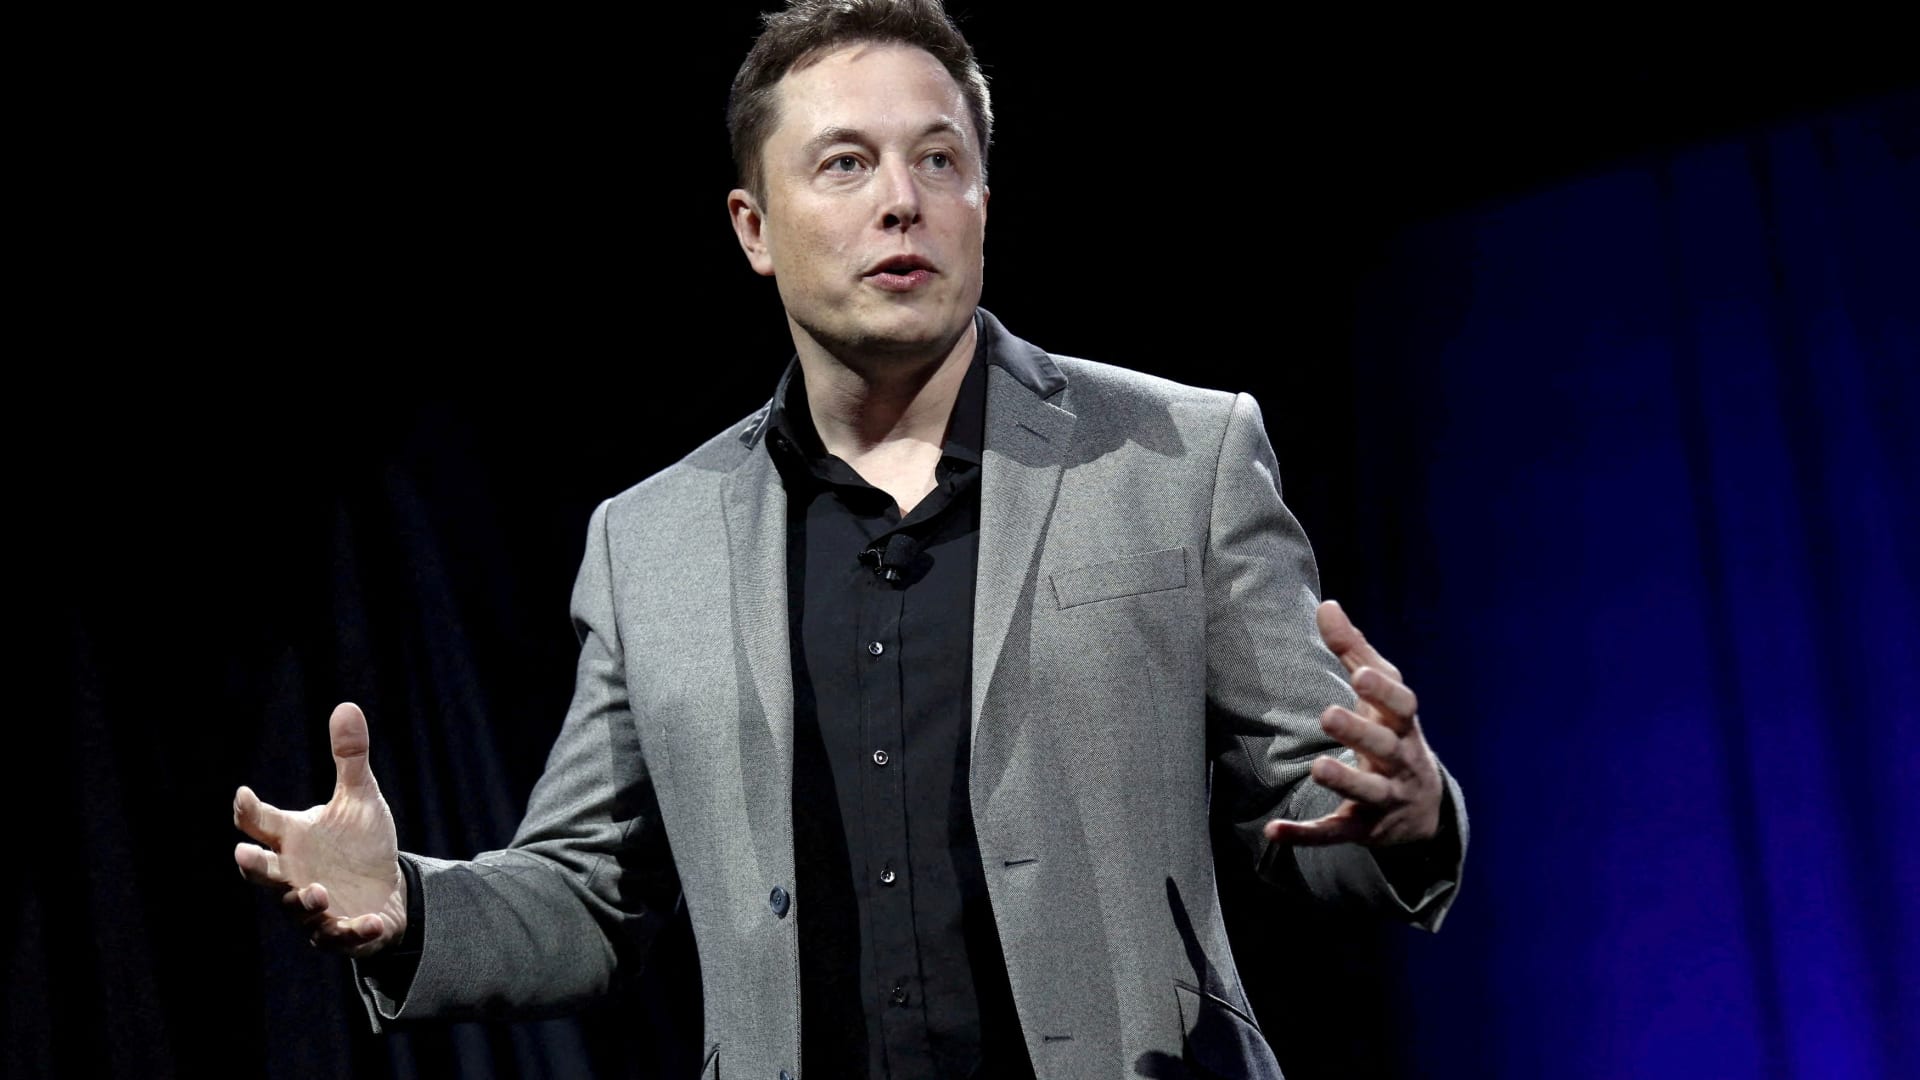 Elon Musk challenges Twitter CEO Parag Agrawal to a debate on bots – CNBC